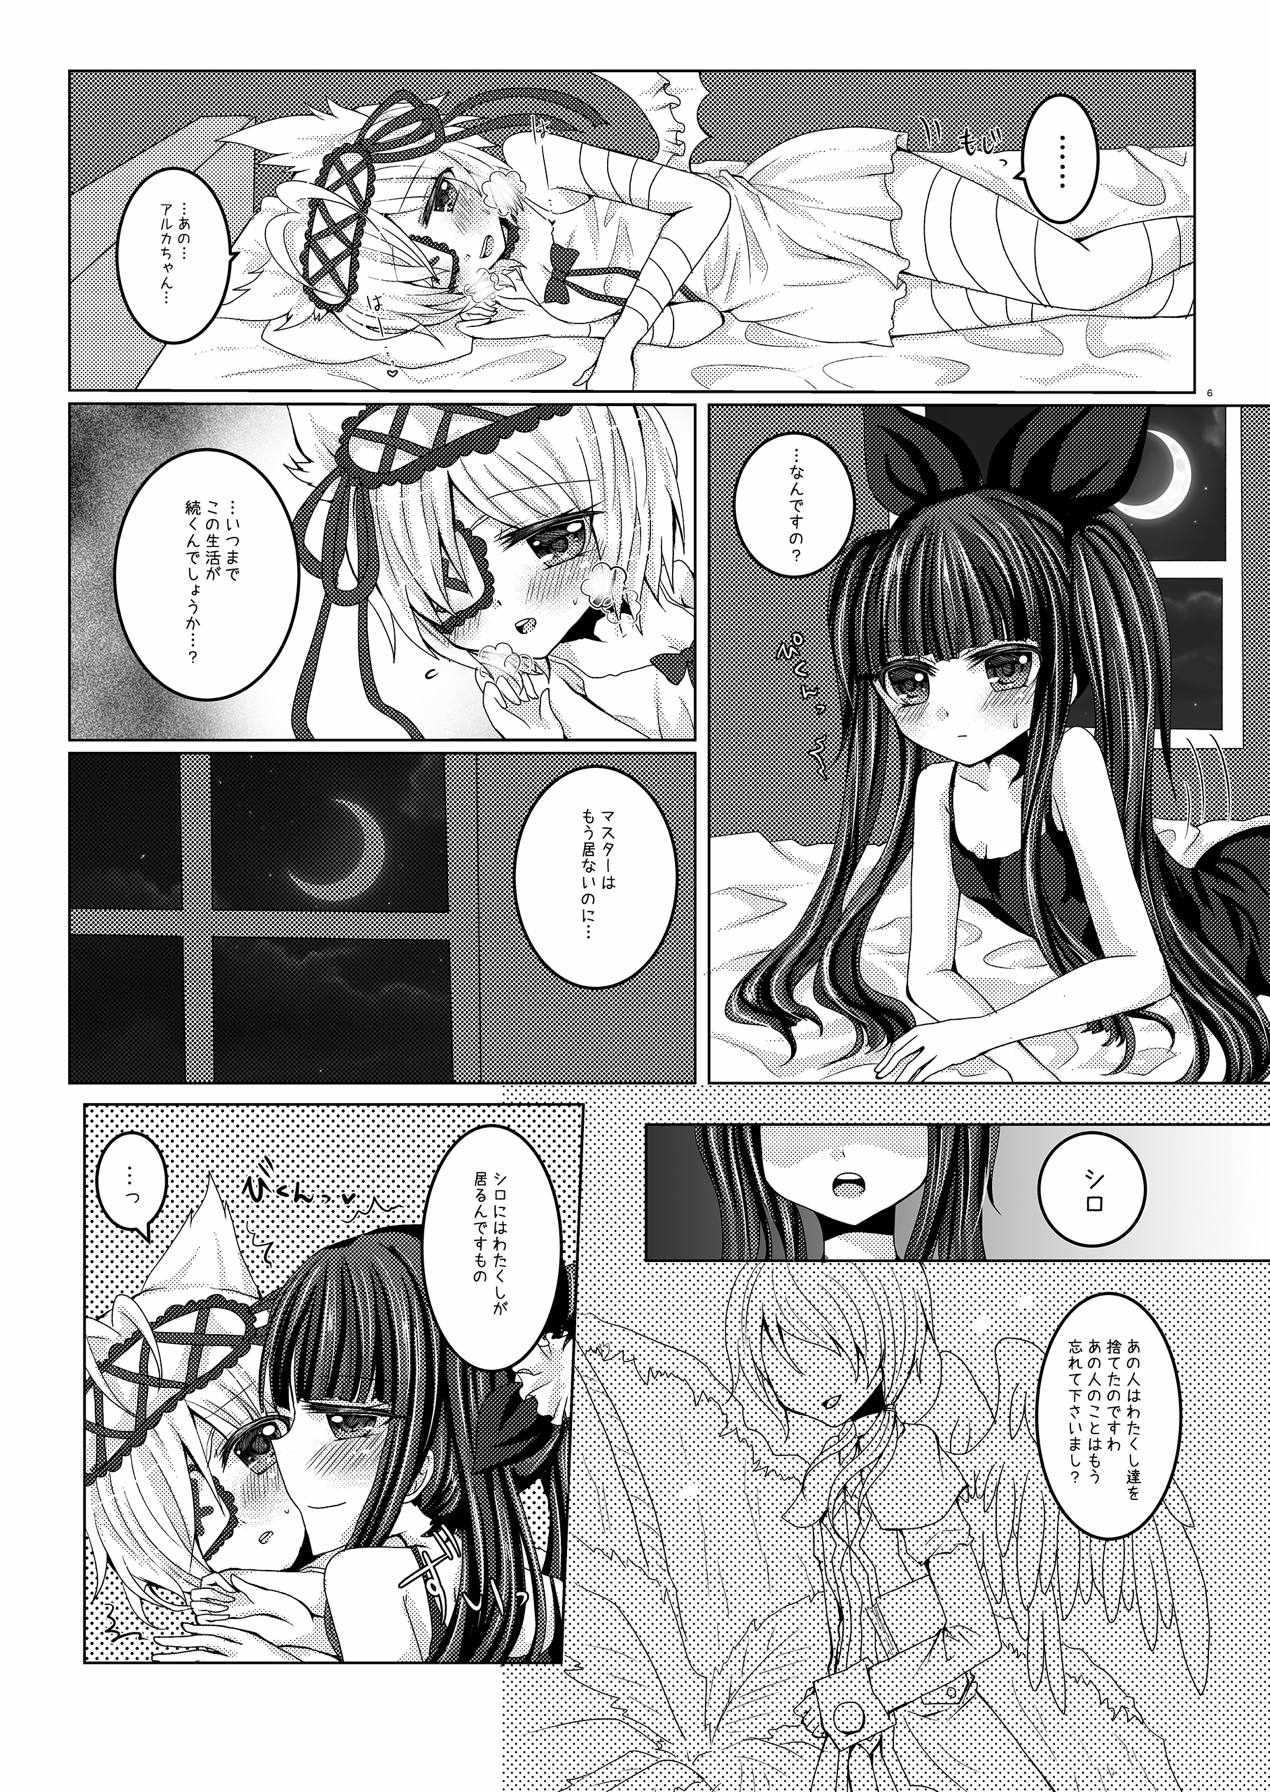 Naturaltits Torikago Shoujo - Emil chronicle online Amador - Page 5